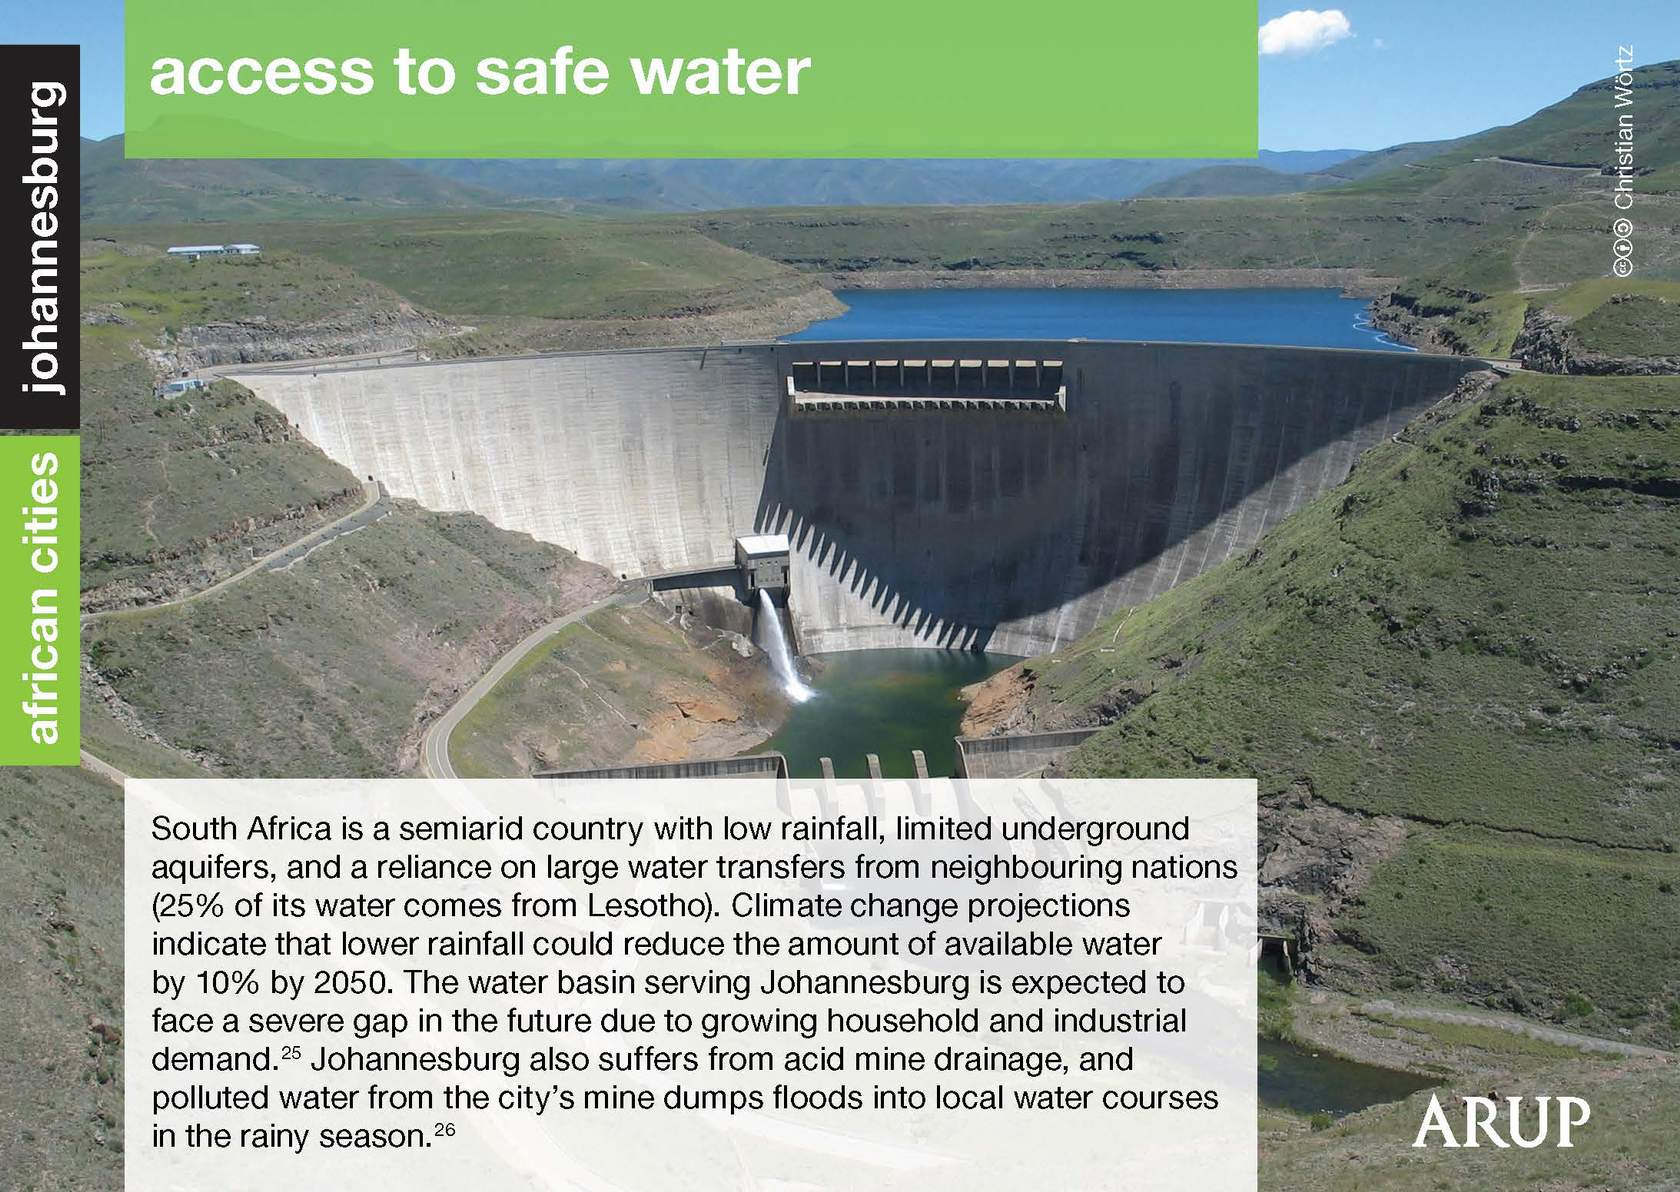 a large concrete water dam in South Africa